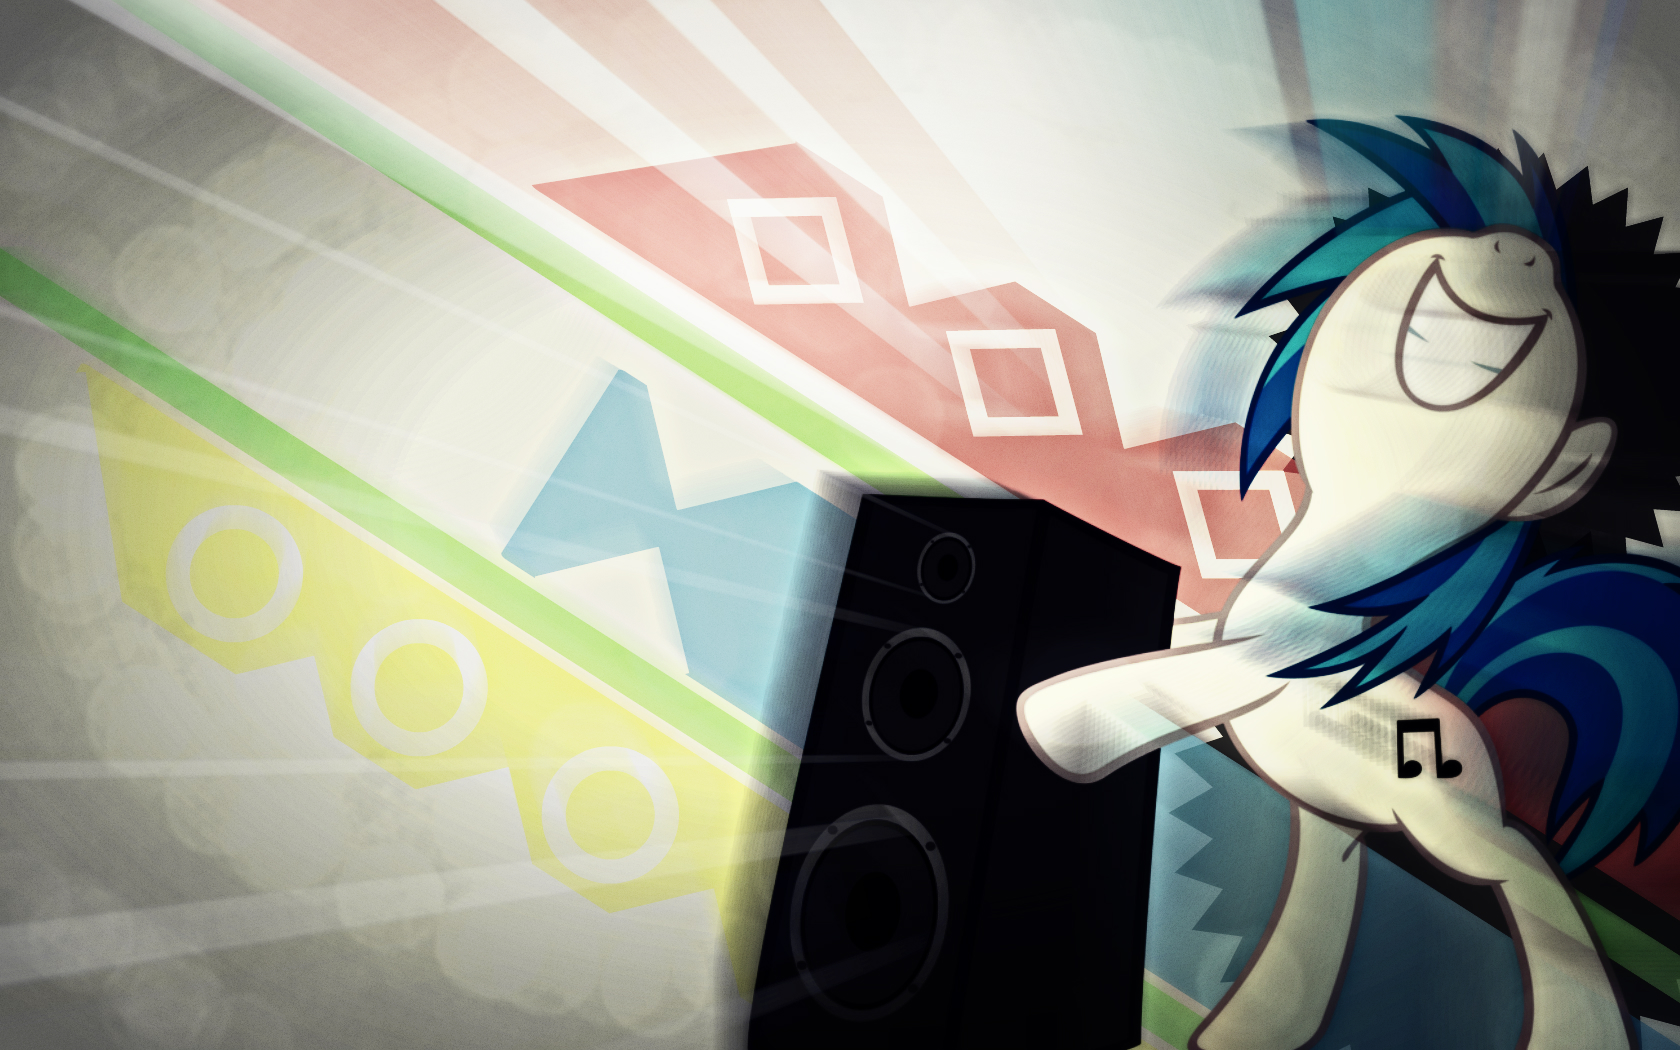 Dj-Pon3 Wallpaper! by EyeofMagnus and PureStyleD